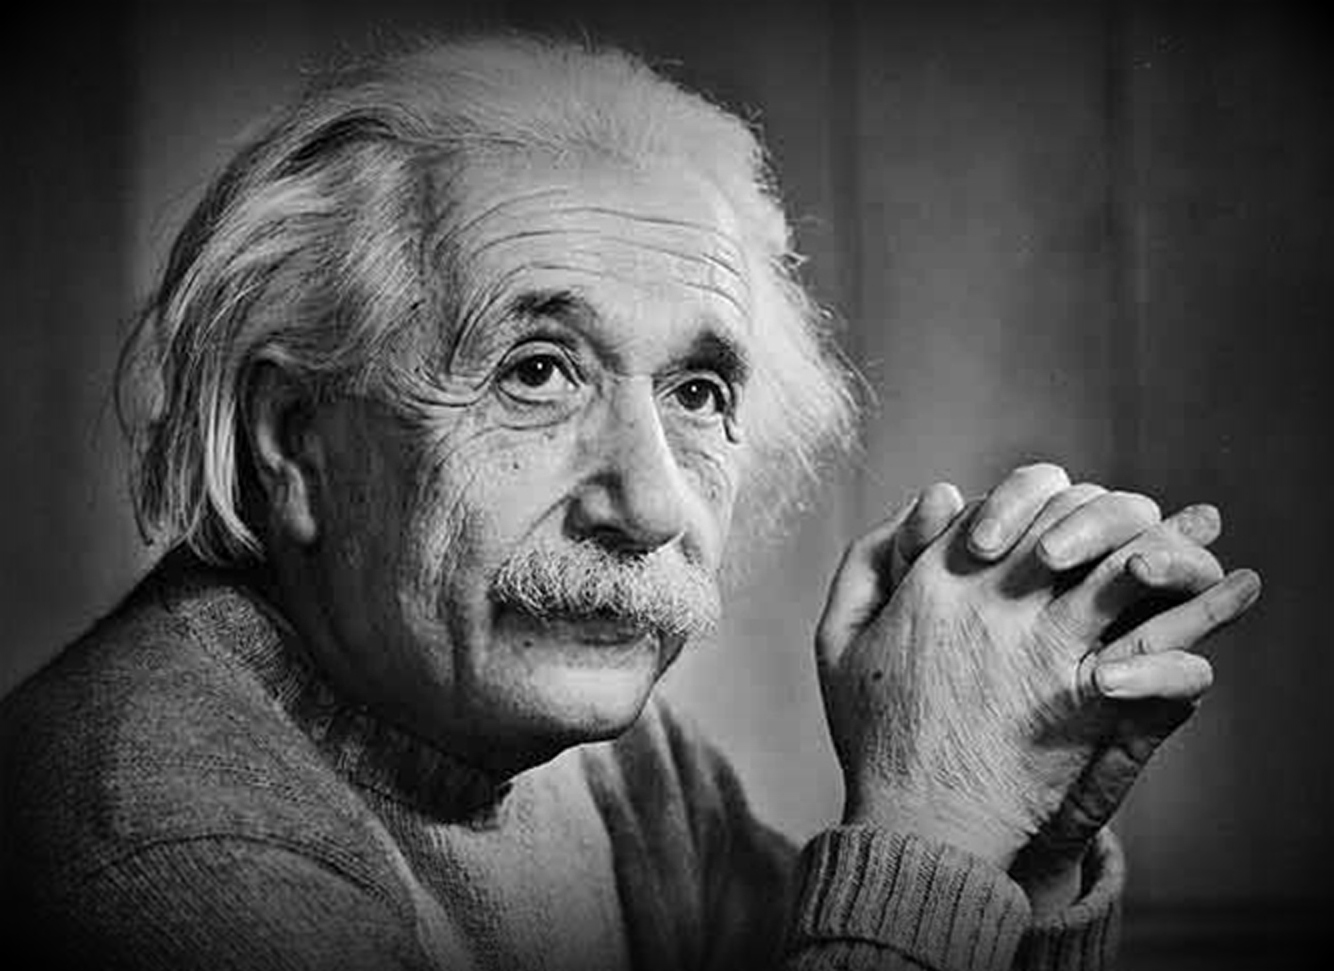 "I have no special talent. I am only passionately curious." - Albert Einstein